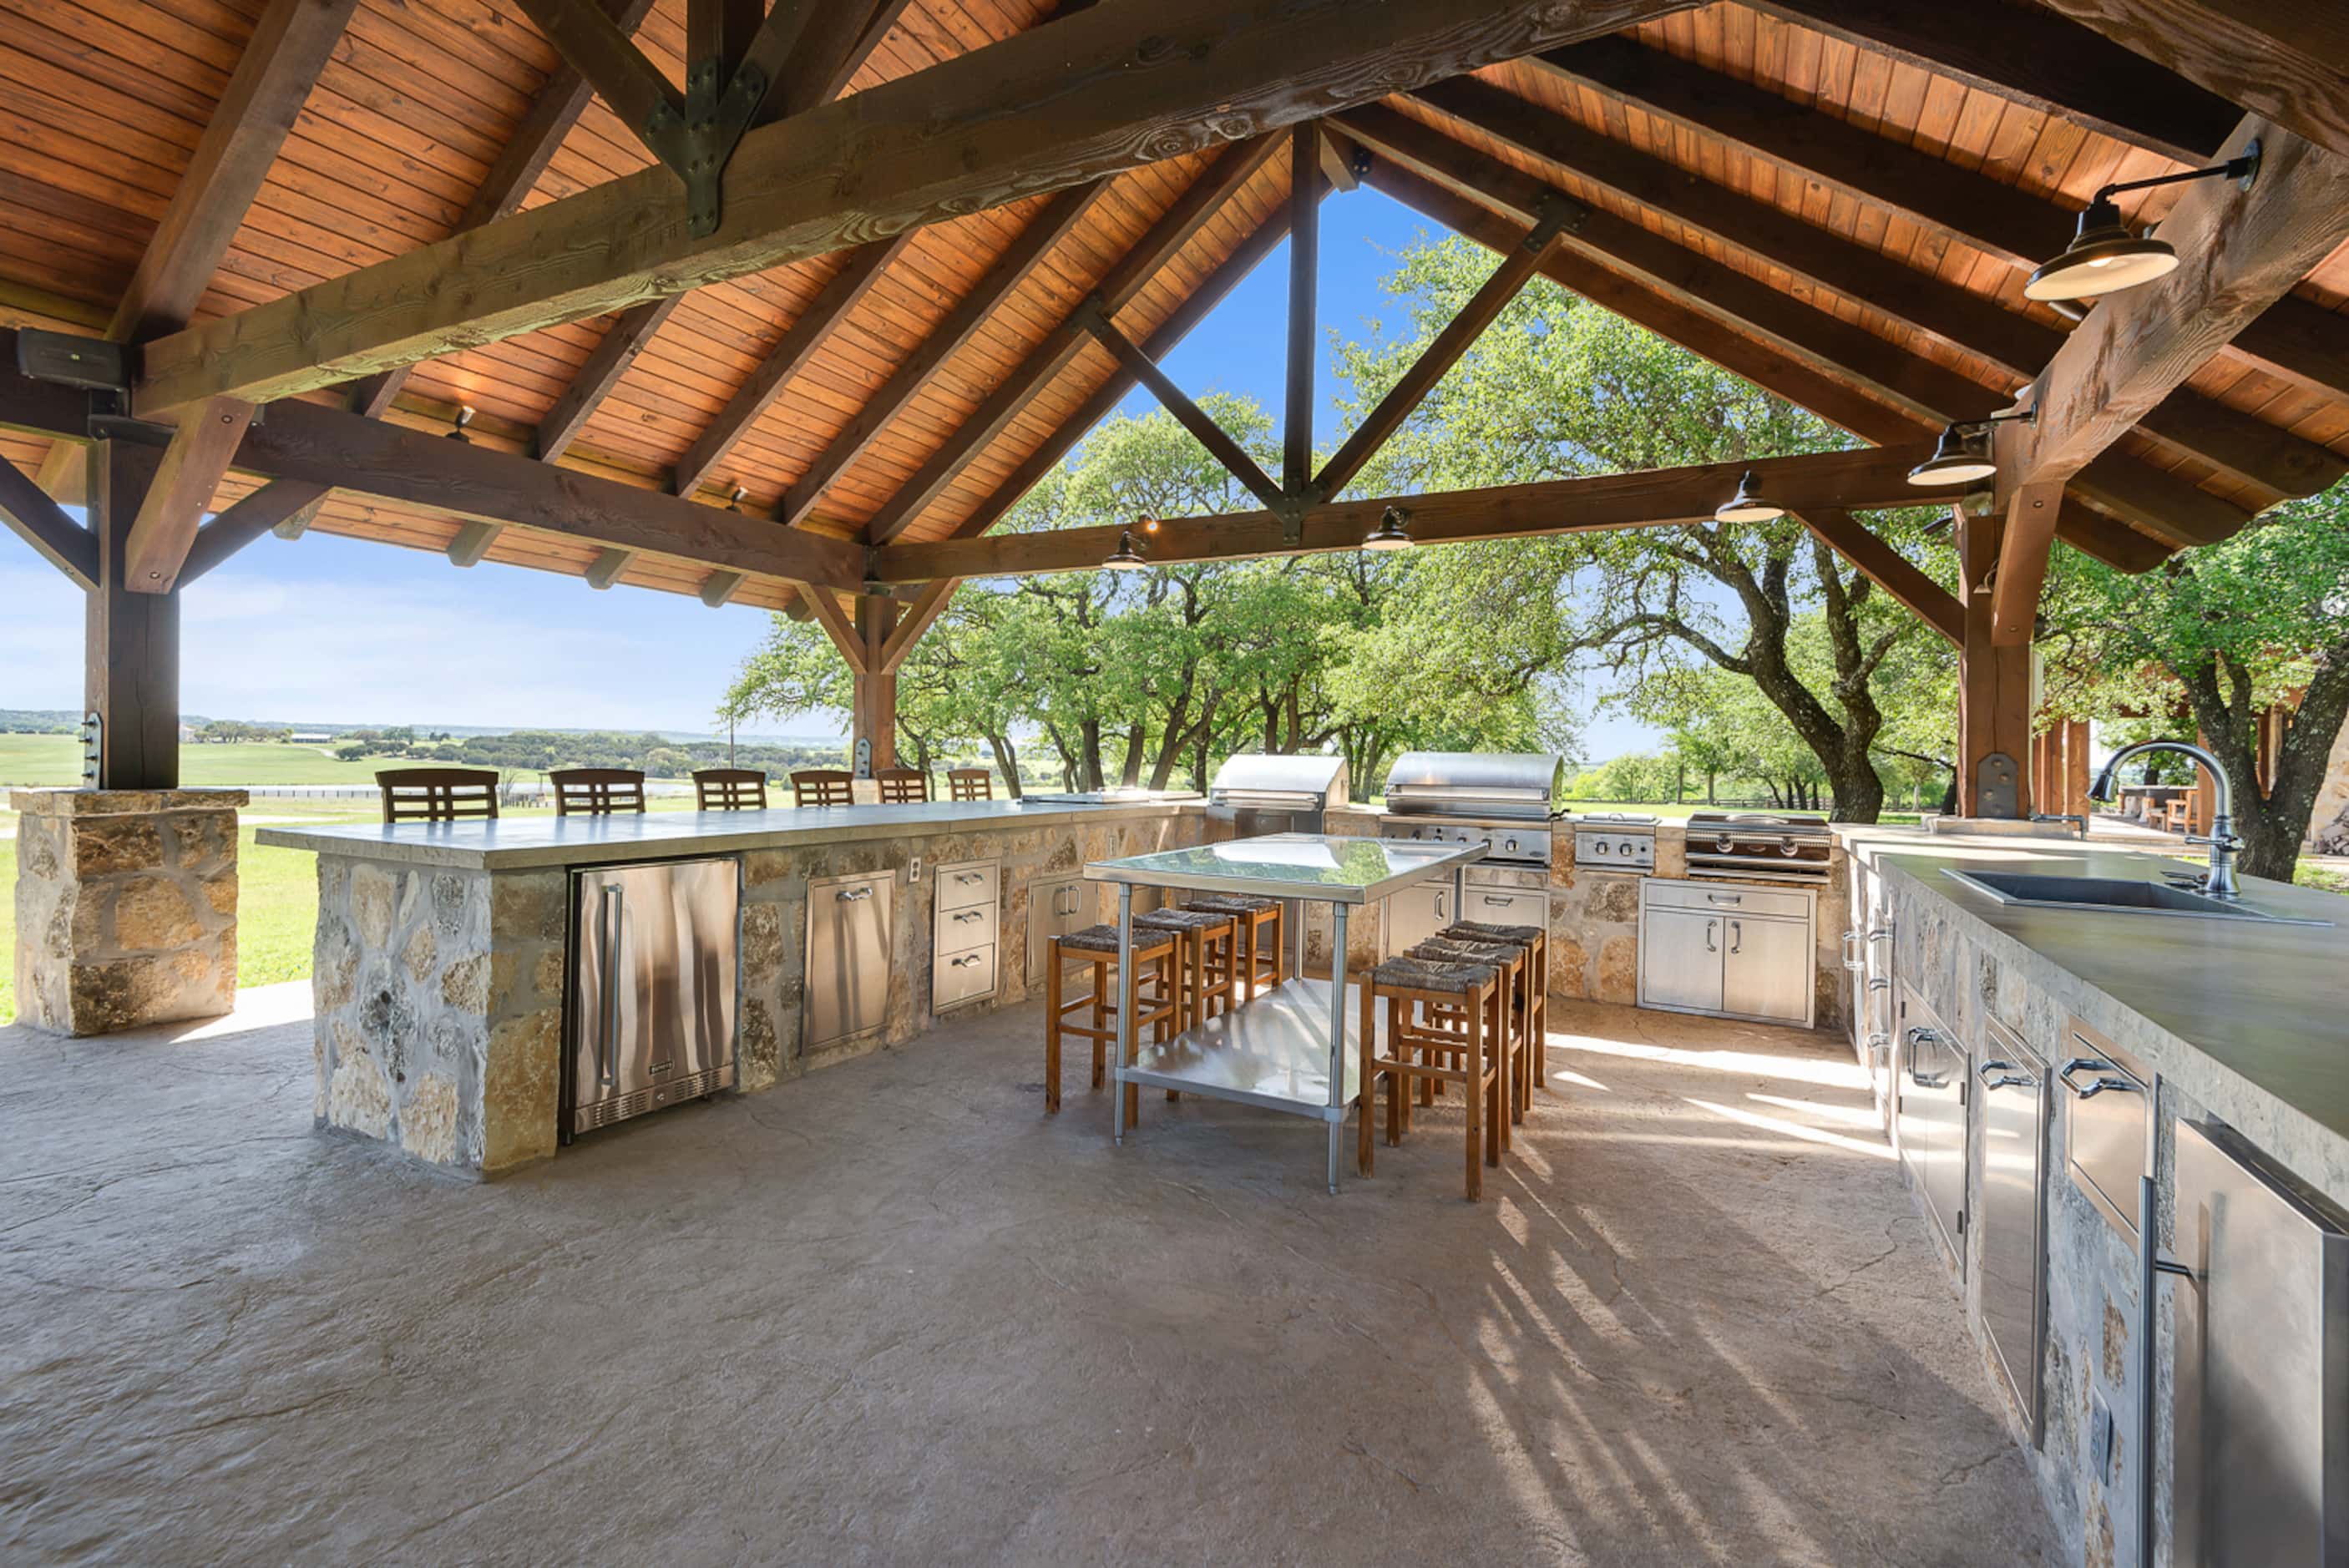 The outdoor kitchen area has ample entertainment space.